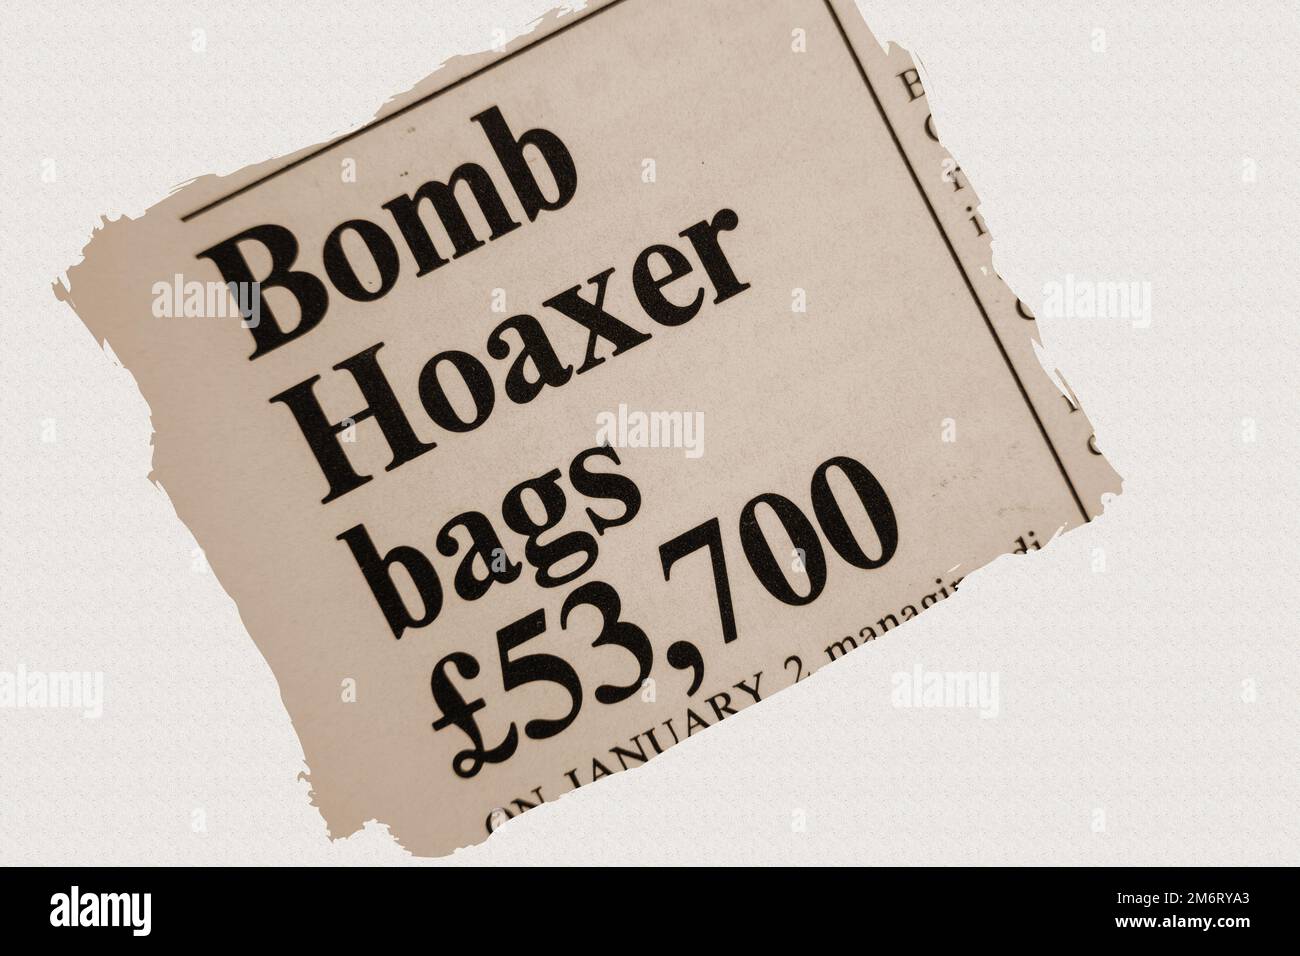 news story from 1975 newspaper headline article title - Bomb Hoaxer bags £53,700 in sepia Stock Photo